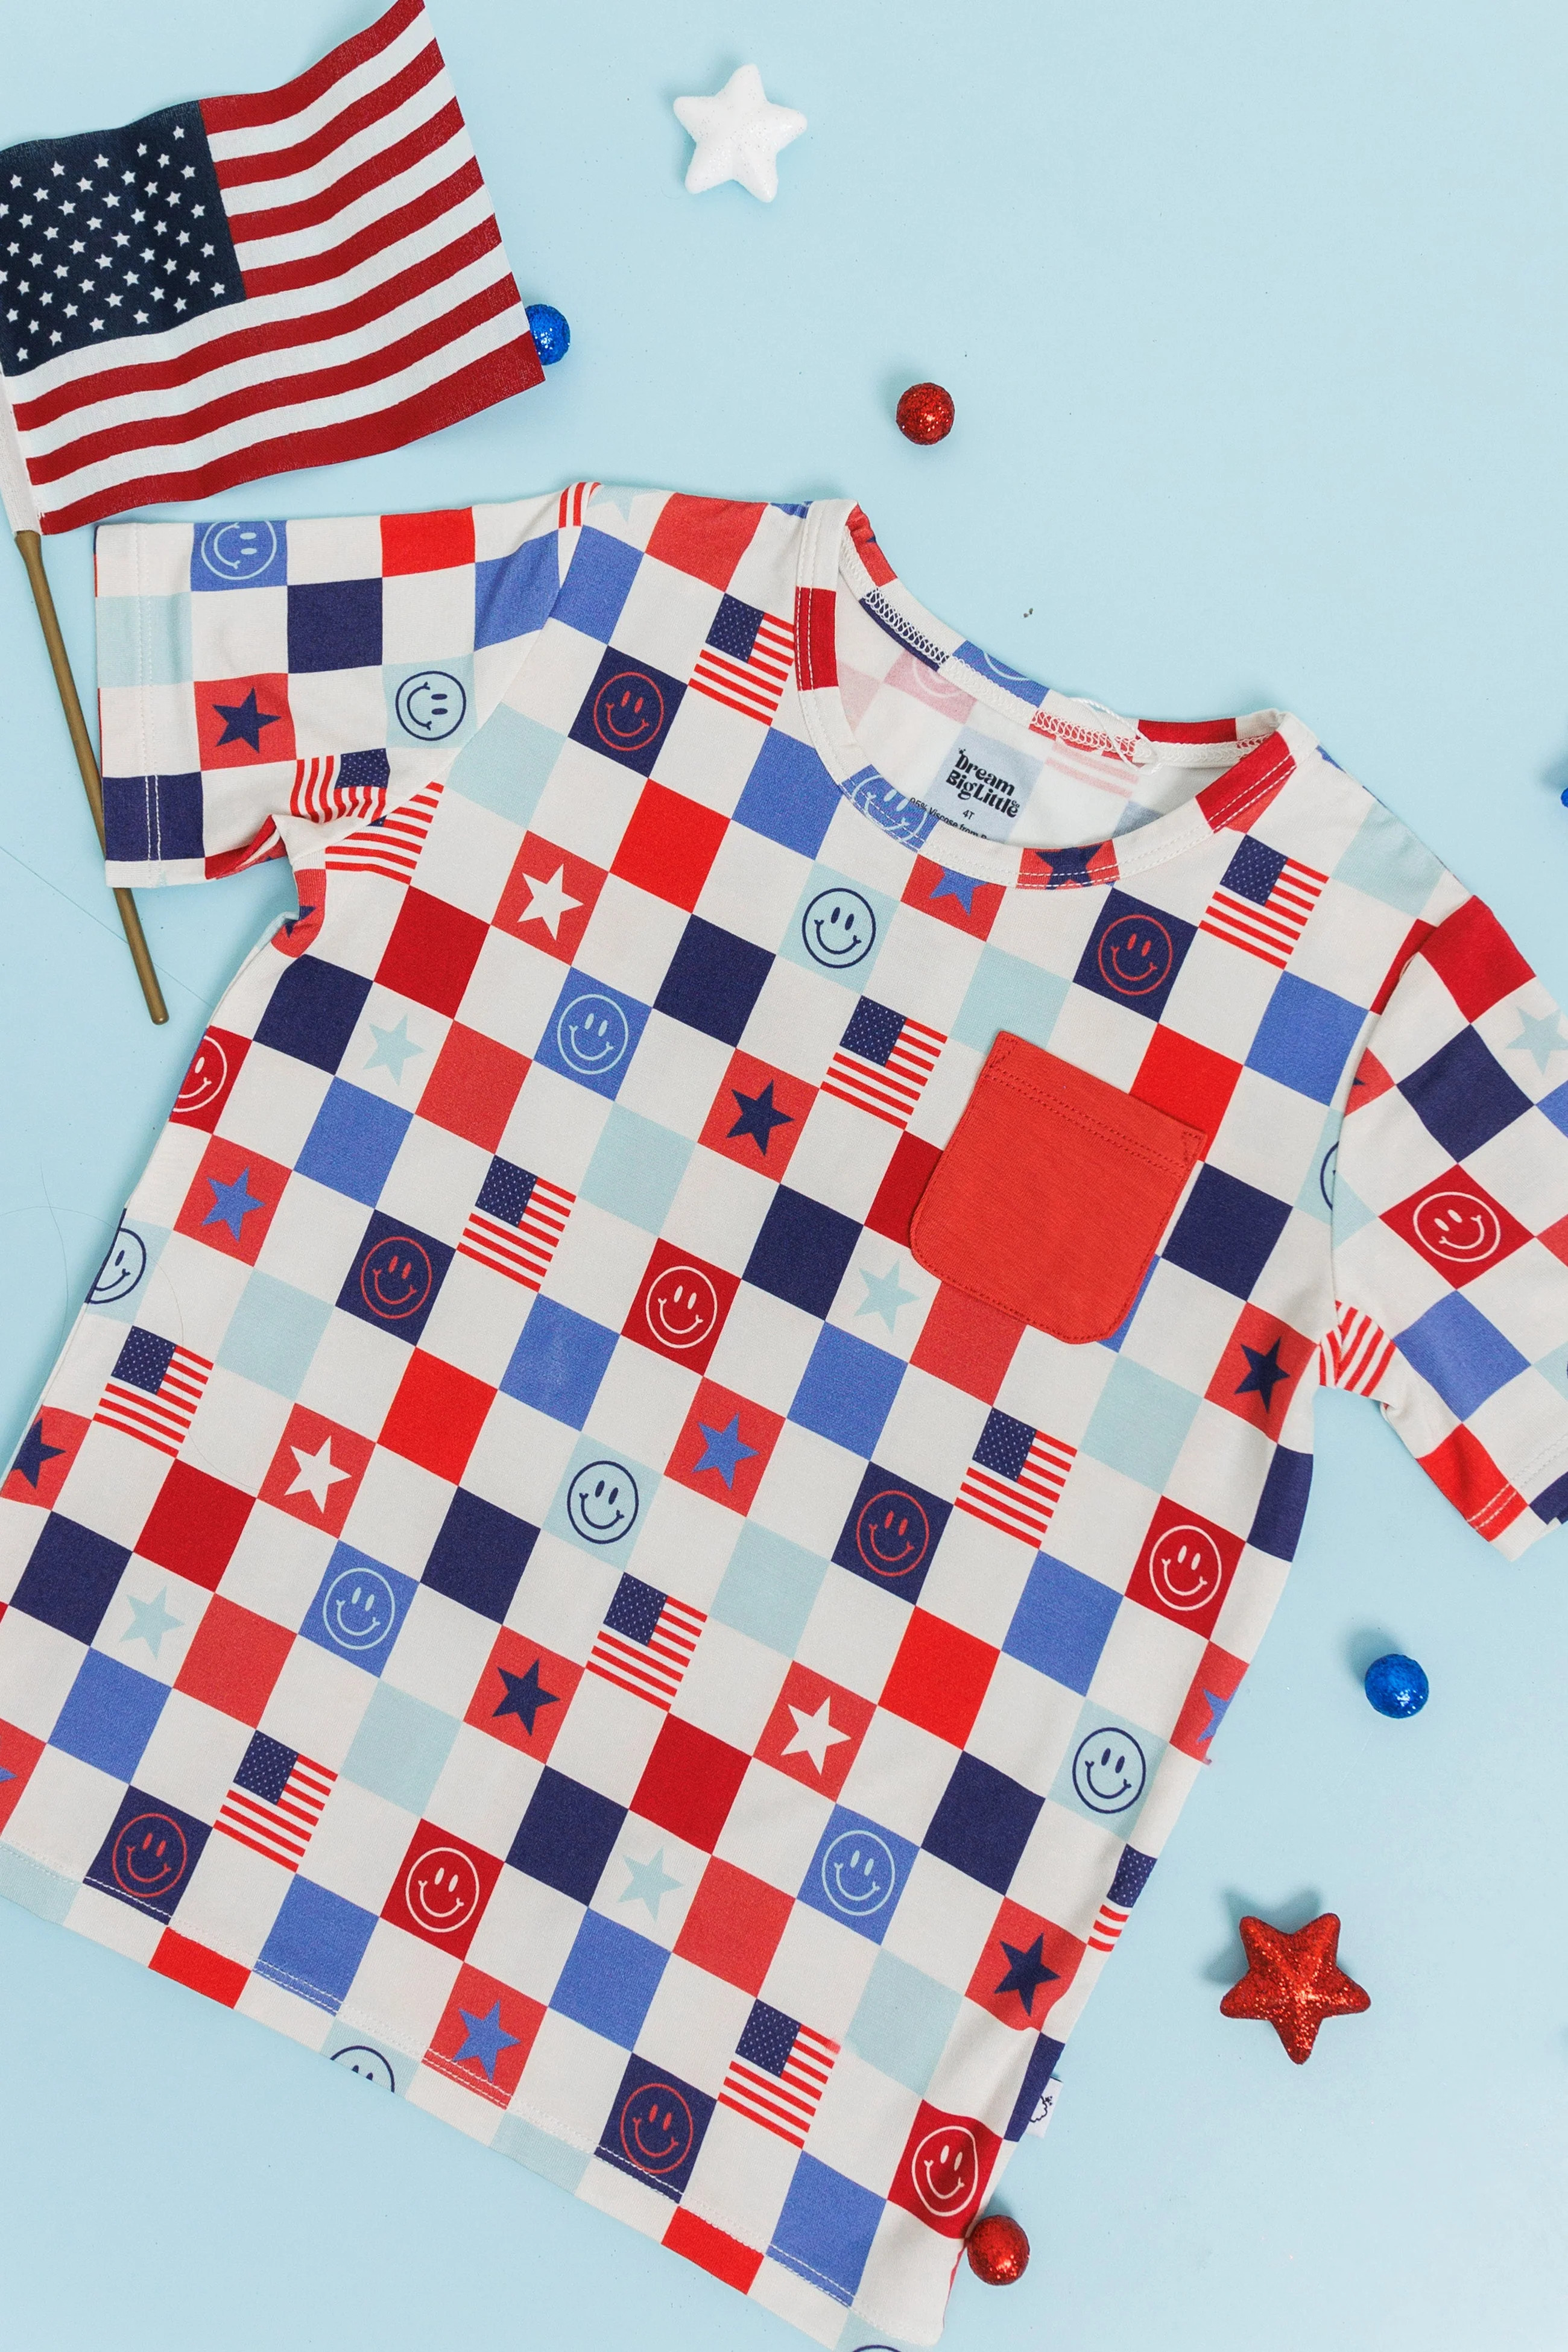 HOME OF THE FREE CHECKERS DREAM POCKET TEE | DREAM BIG LITTLE CO